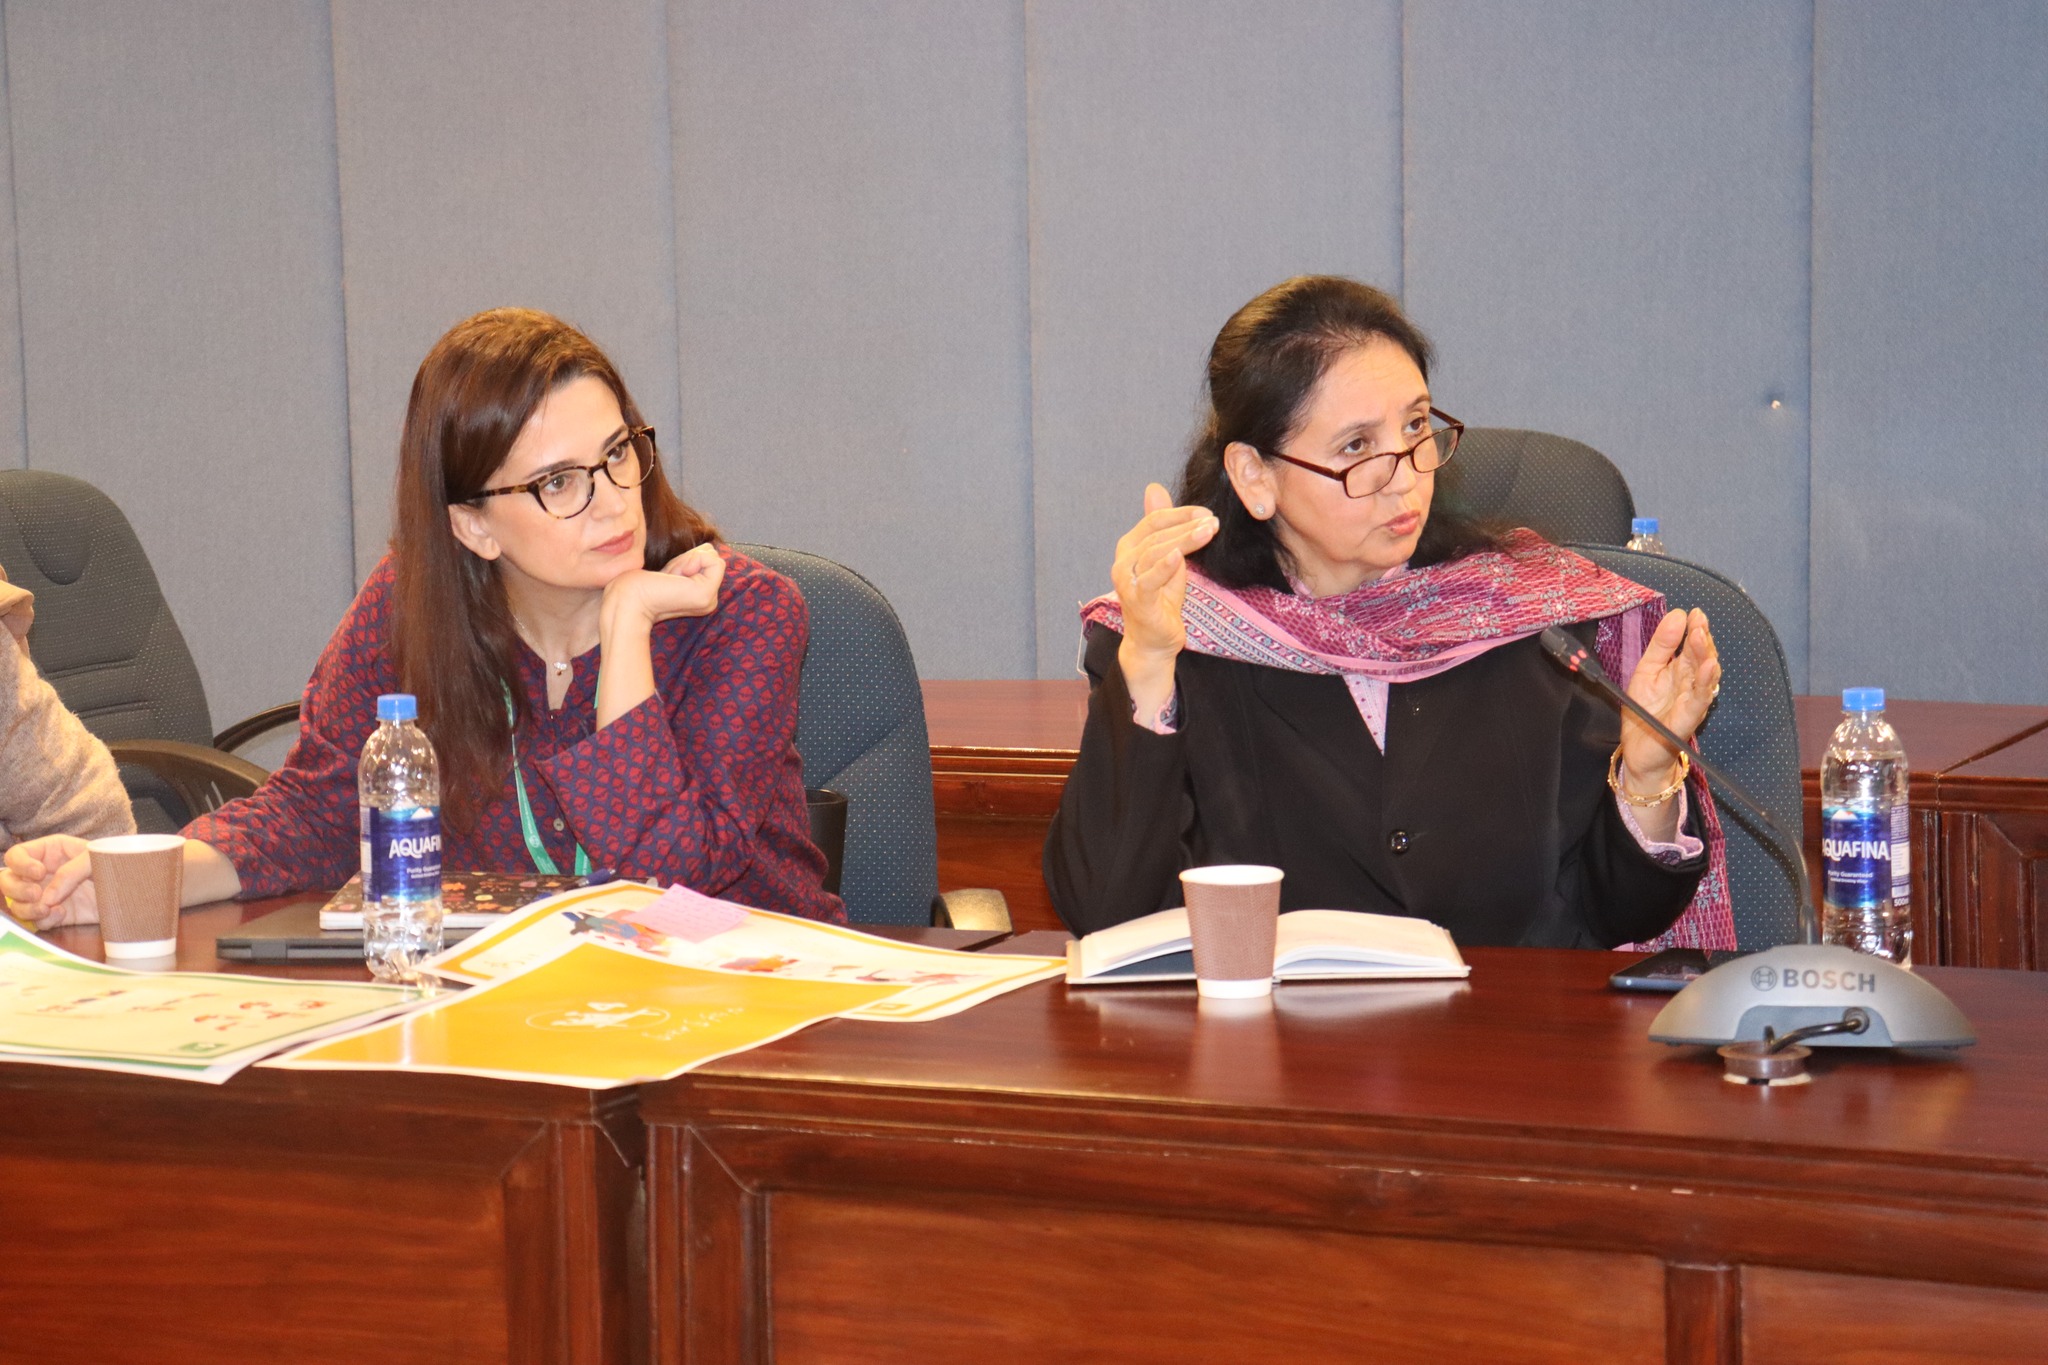 ECD Working Group Meeting organised by the Ministry of Planning, Development and Special Initiatives(MoPDSI) and UNICEF Pakistan